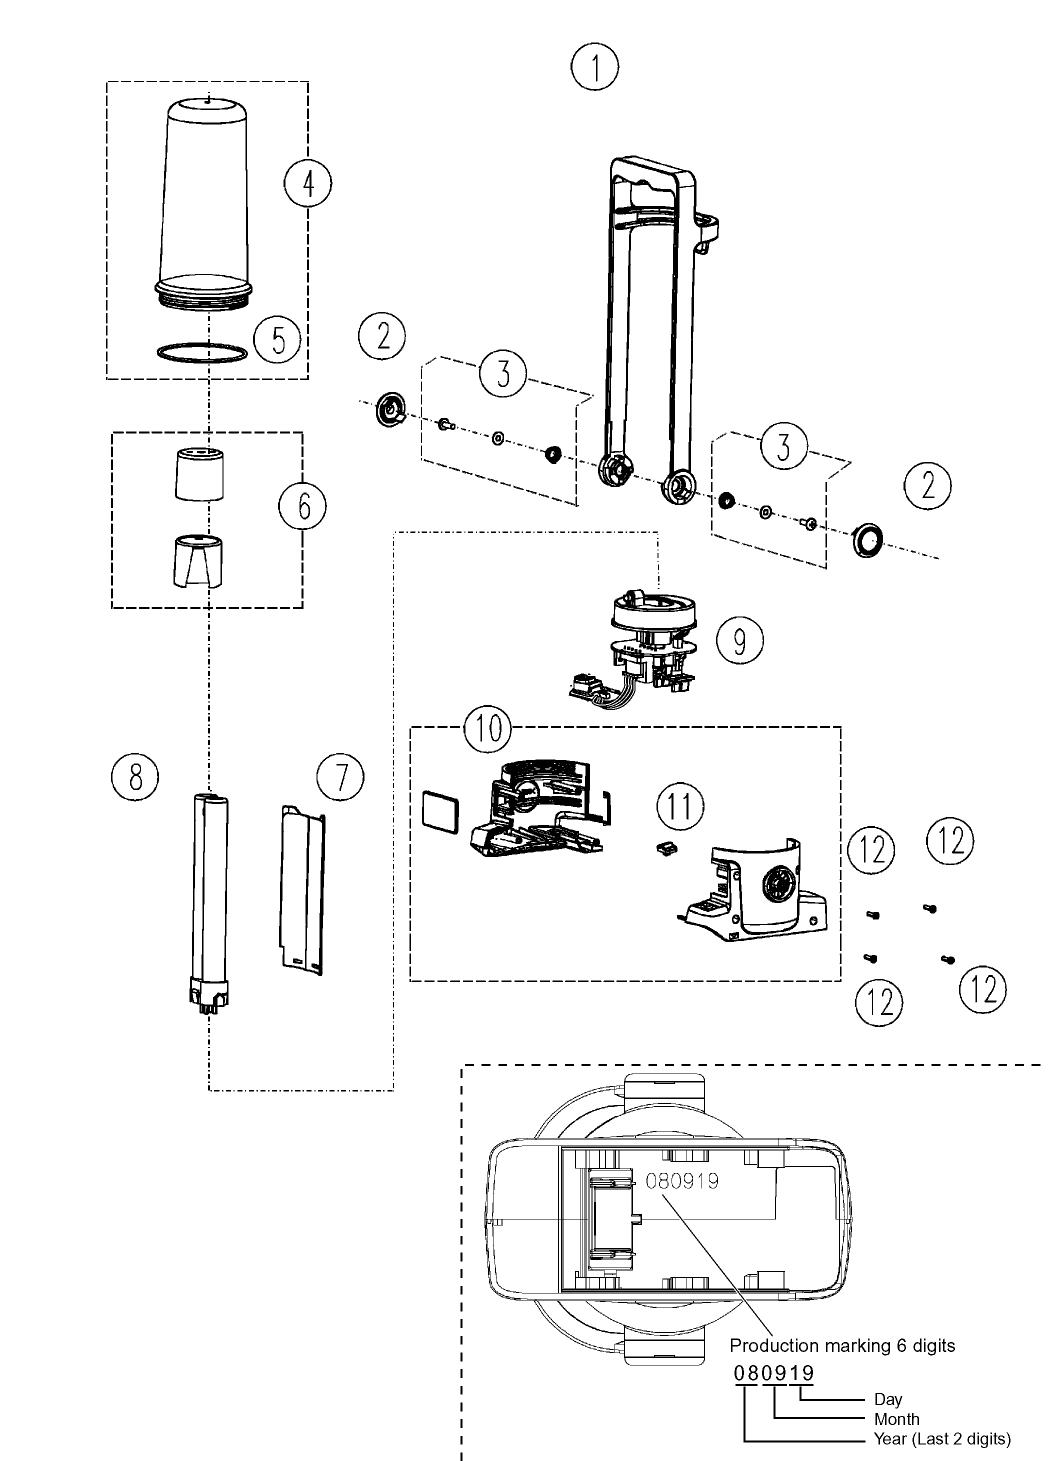 EY3741: Exploded View